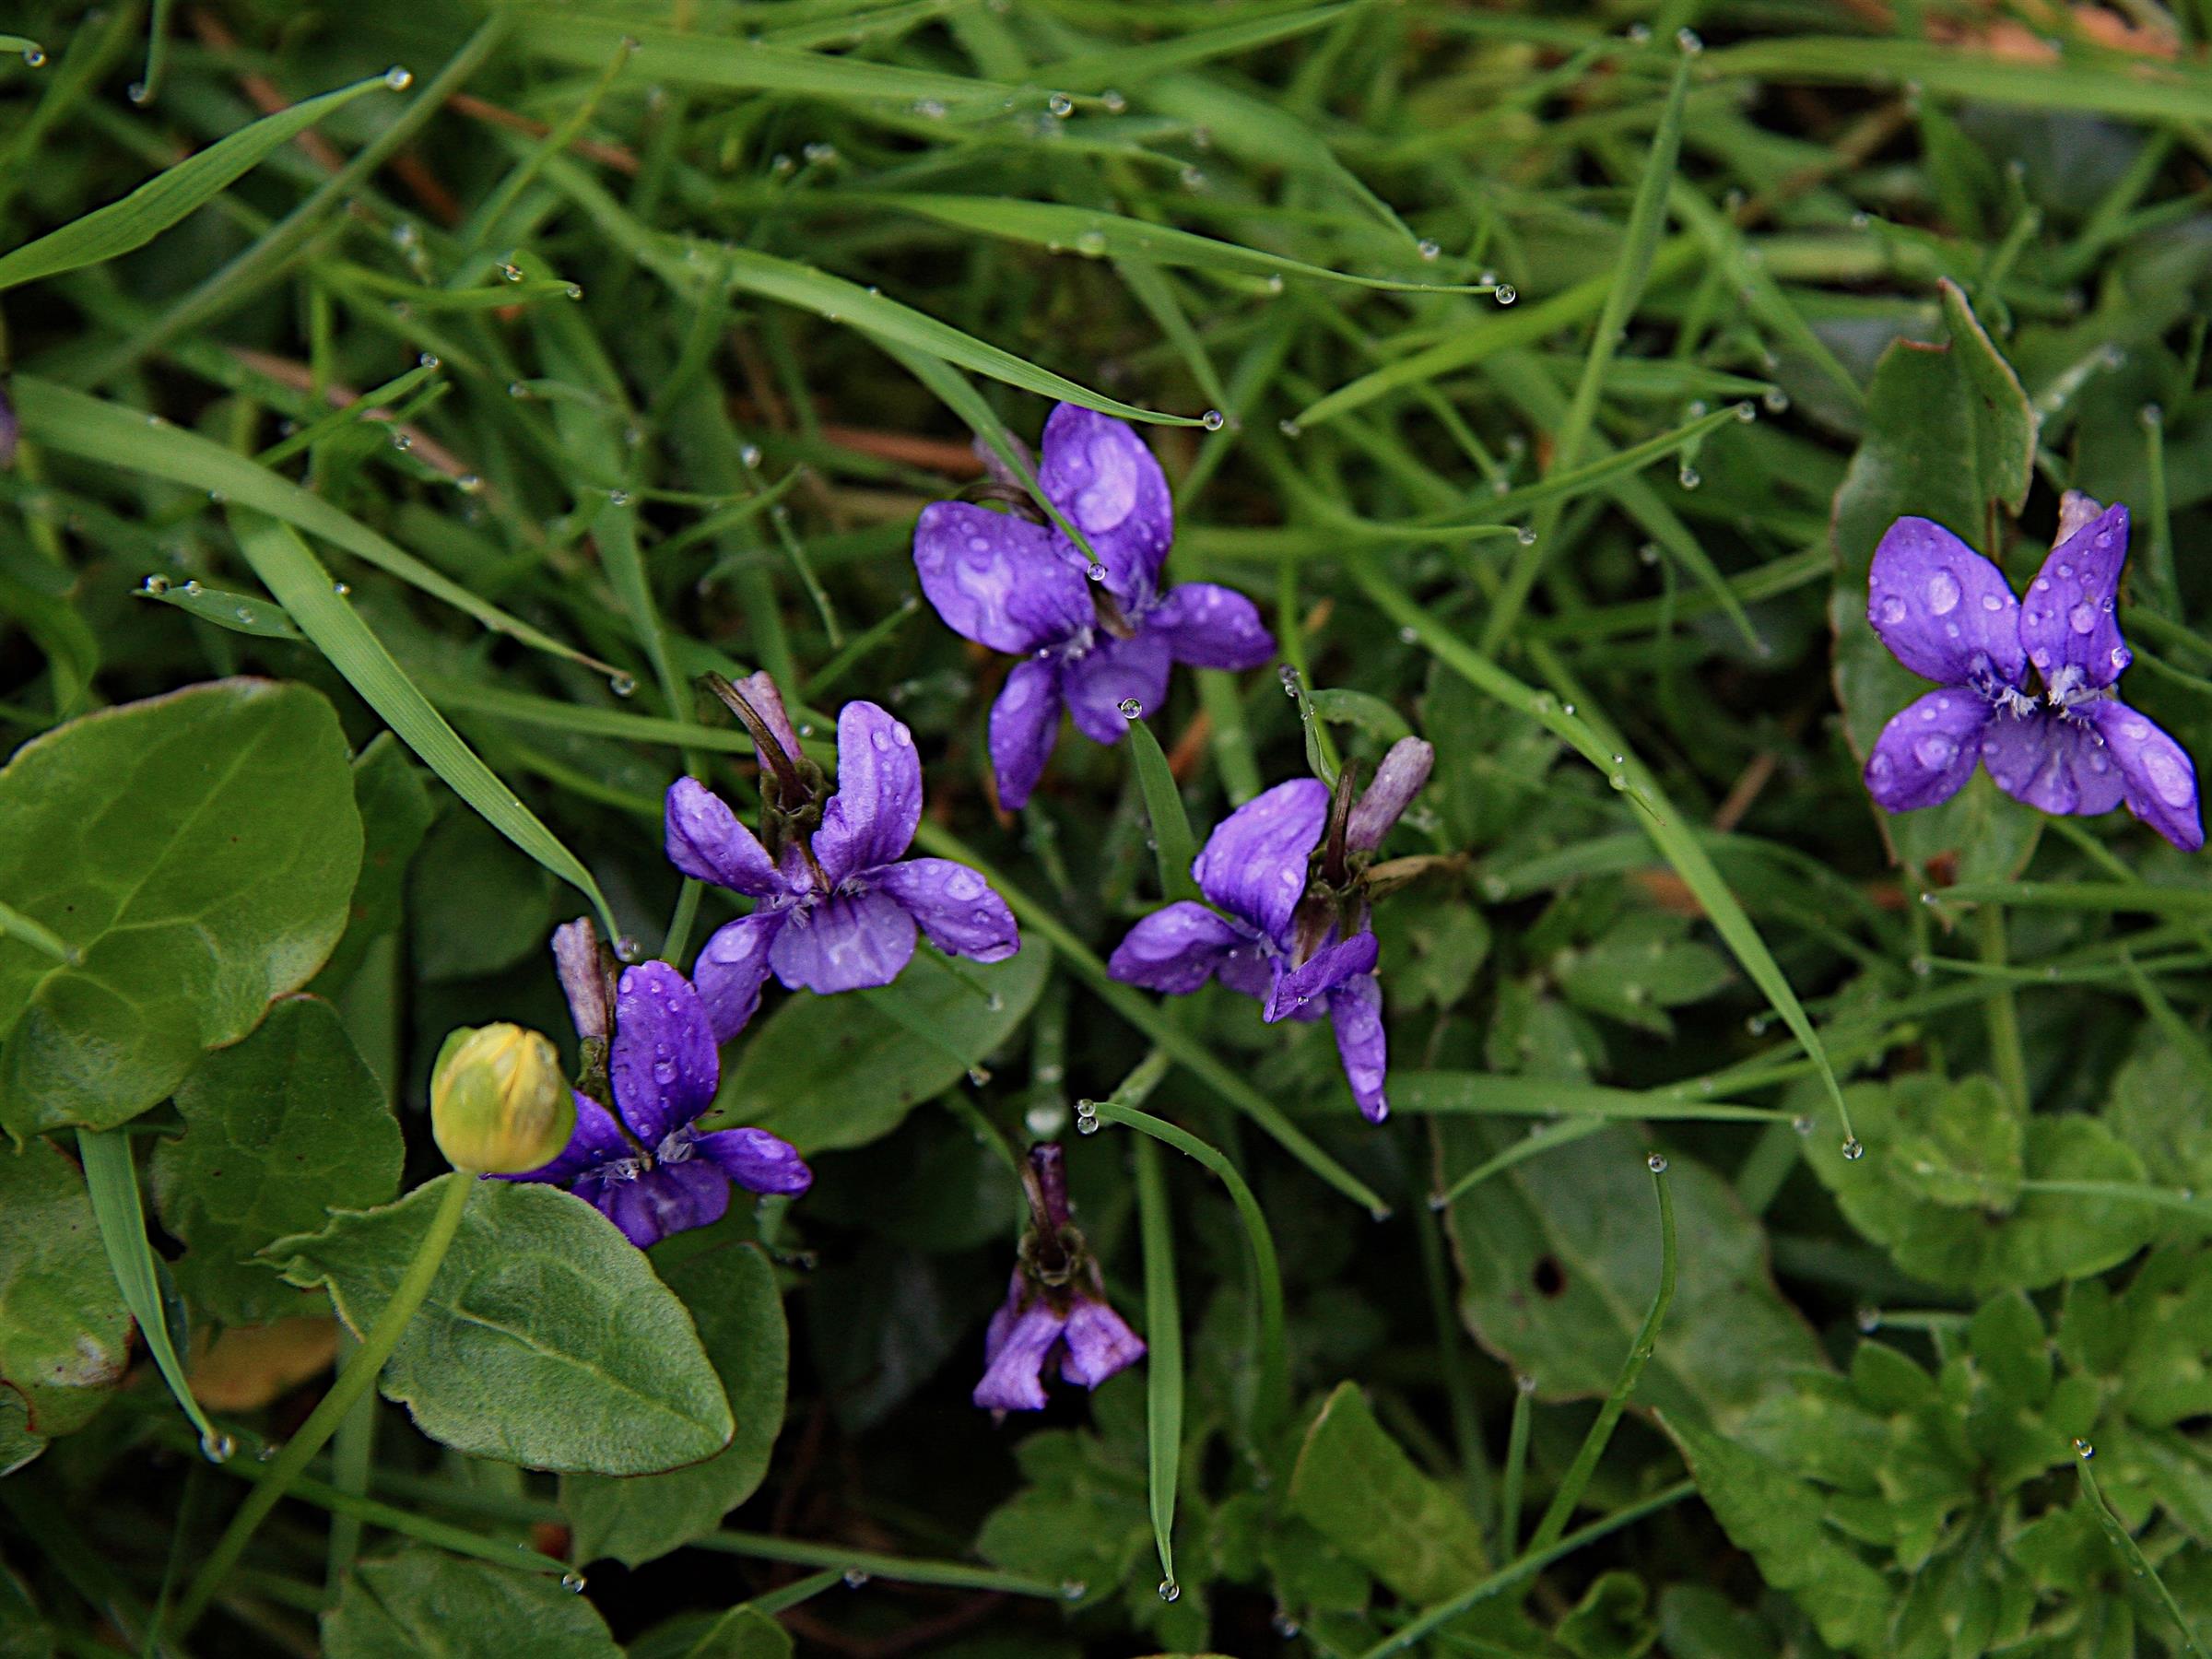 Violets in spring, the food plant of the rare fritillary caterpillar